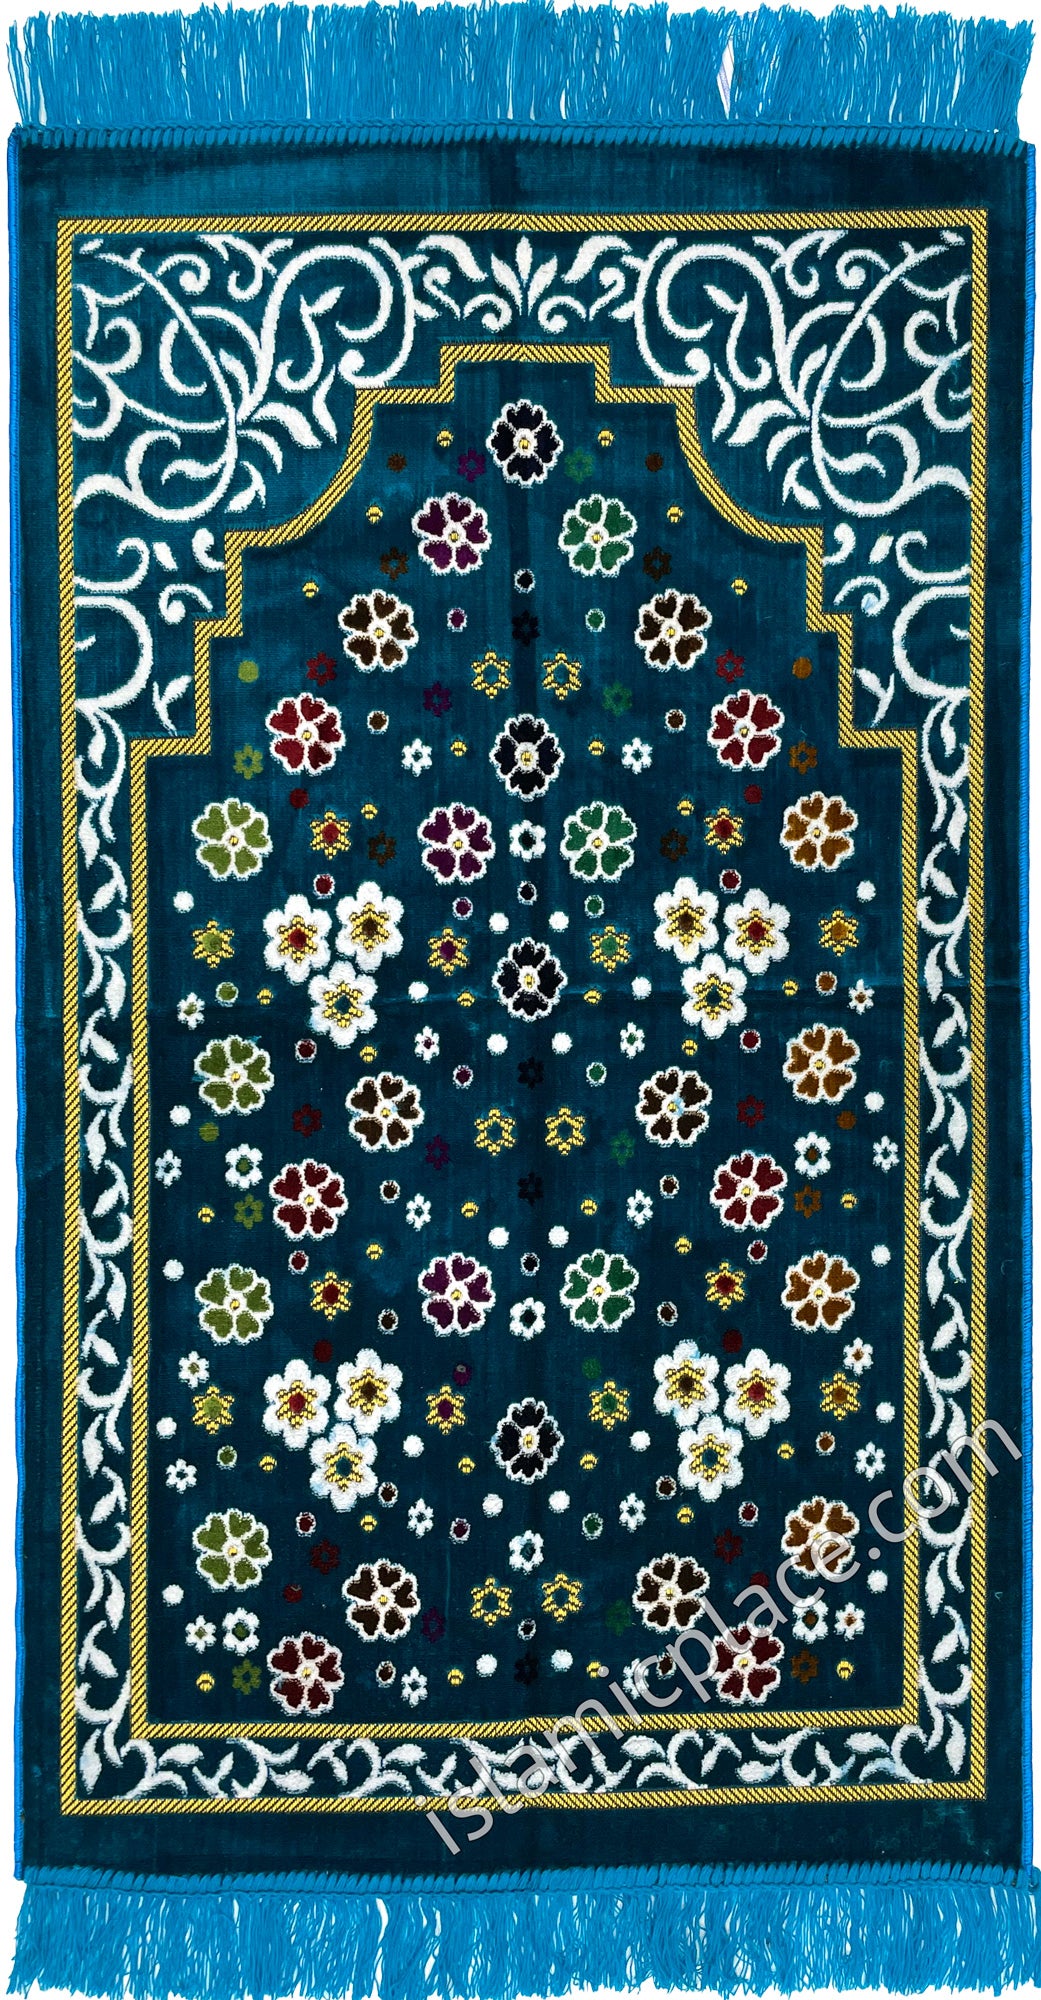 Teal Blue Prayer Rug with Floral Paradise Mihrab